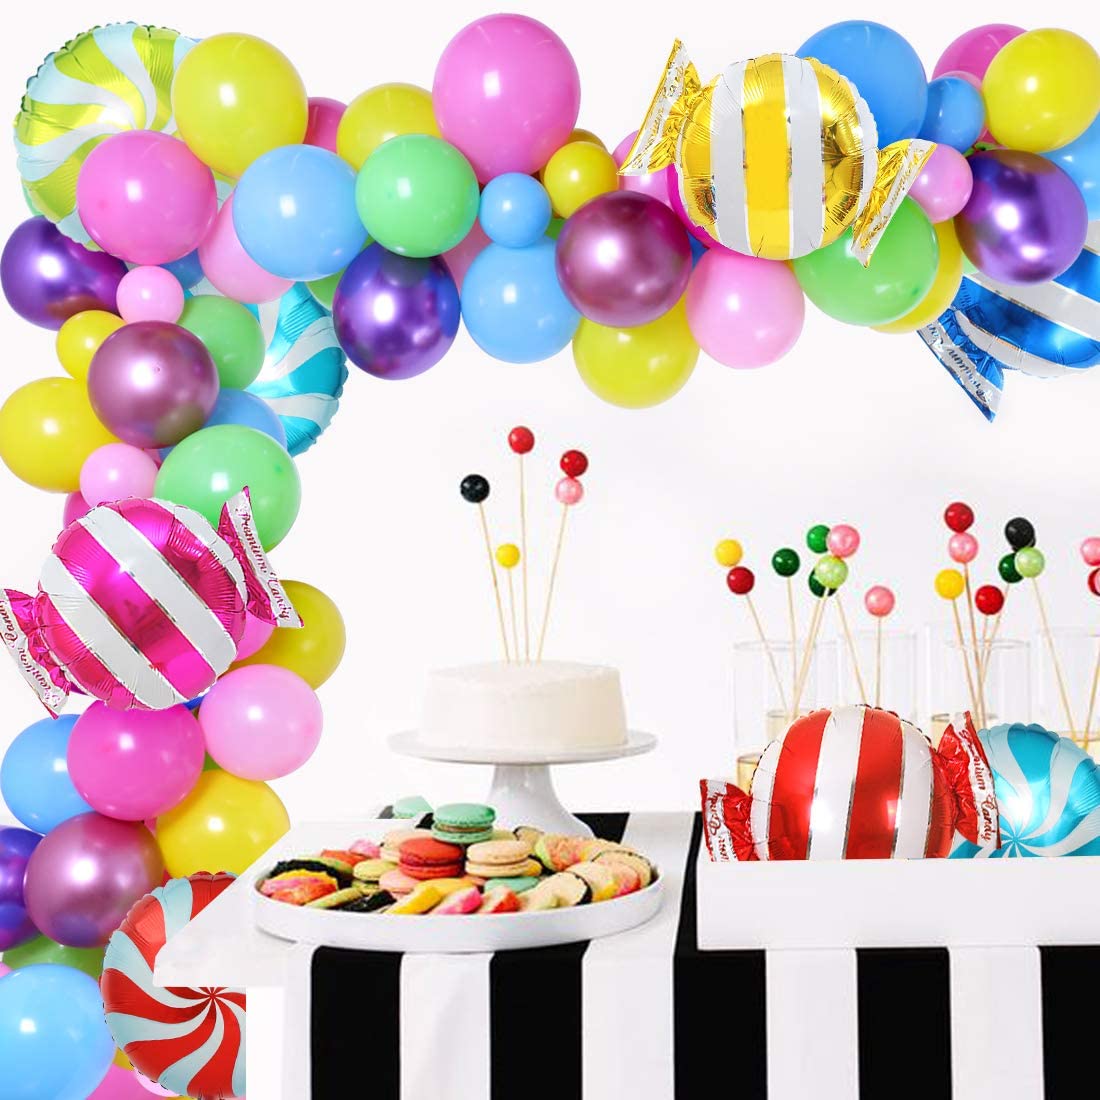 Candyland Party Decorations Sweet Shoppe Lollipop Party - Etsy